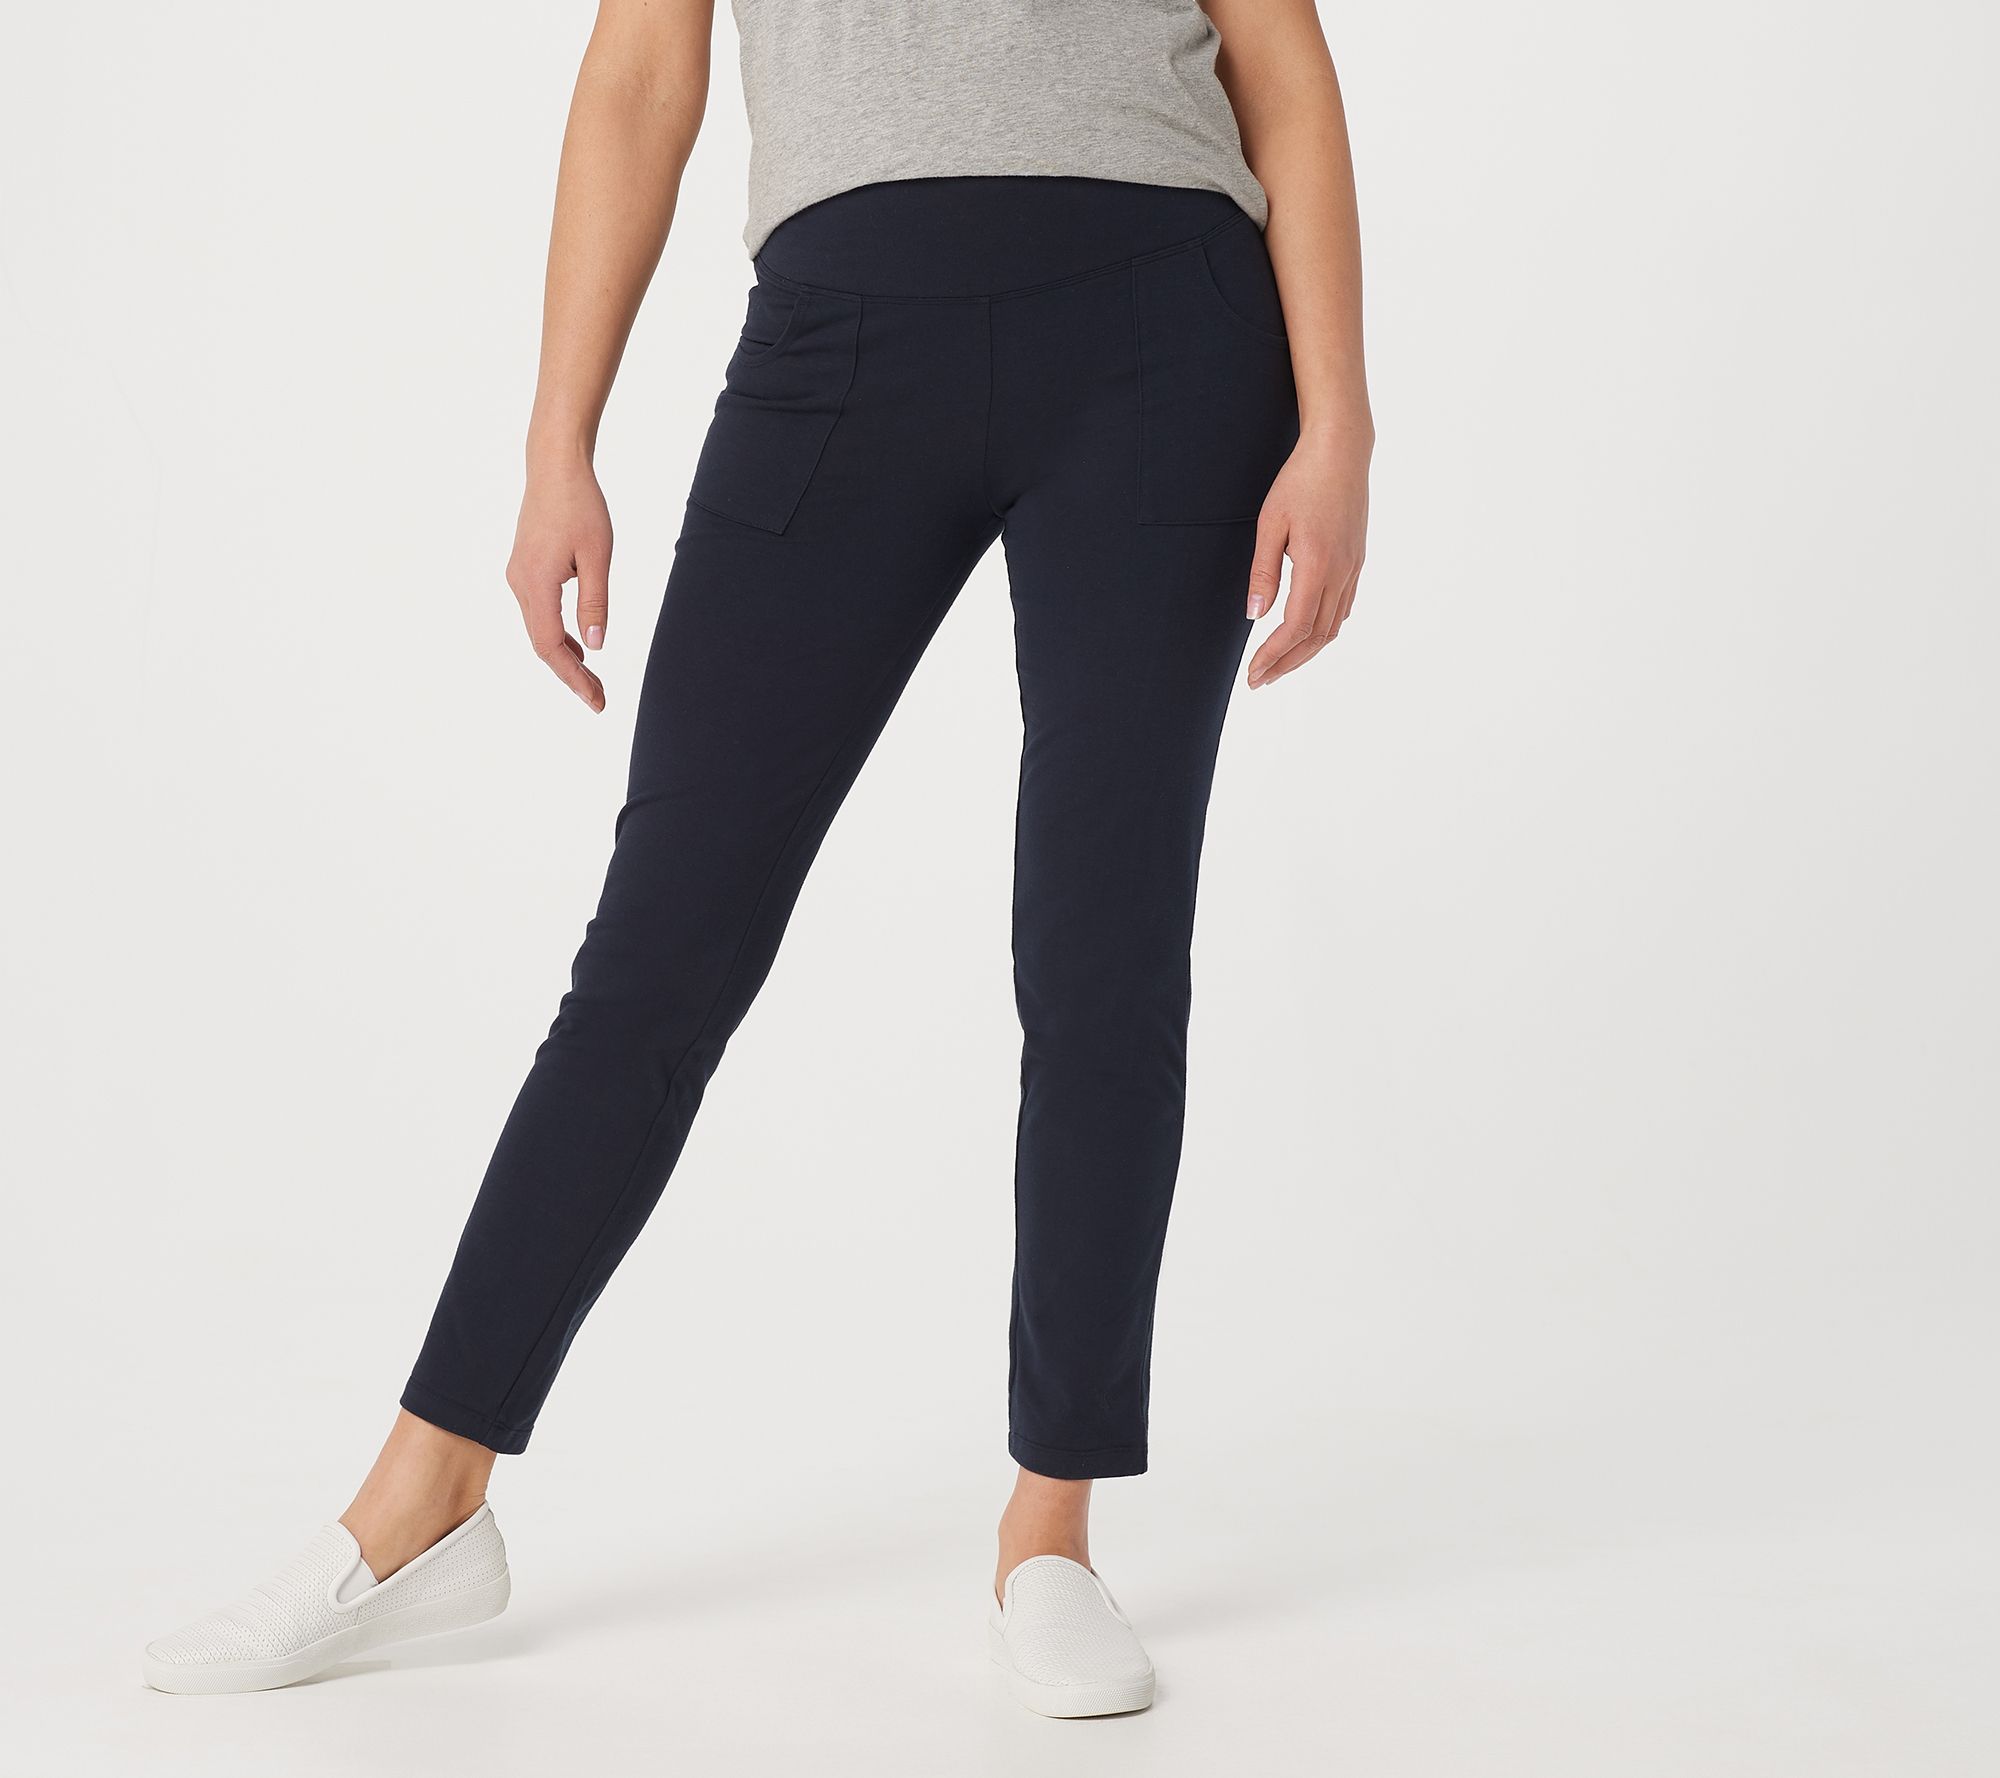 Misses XX-Small (00-0) - No Closure - Ankle Pants 